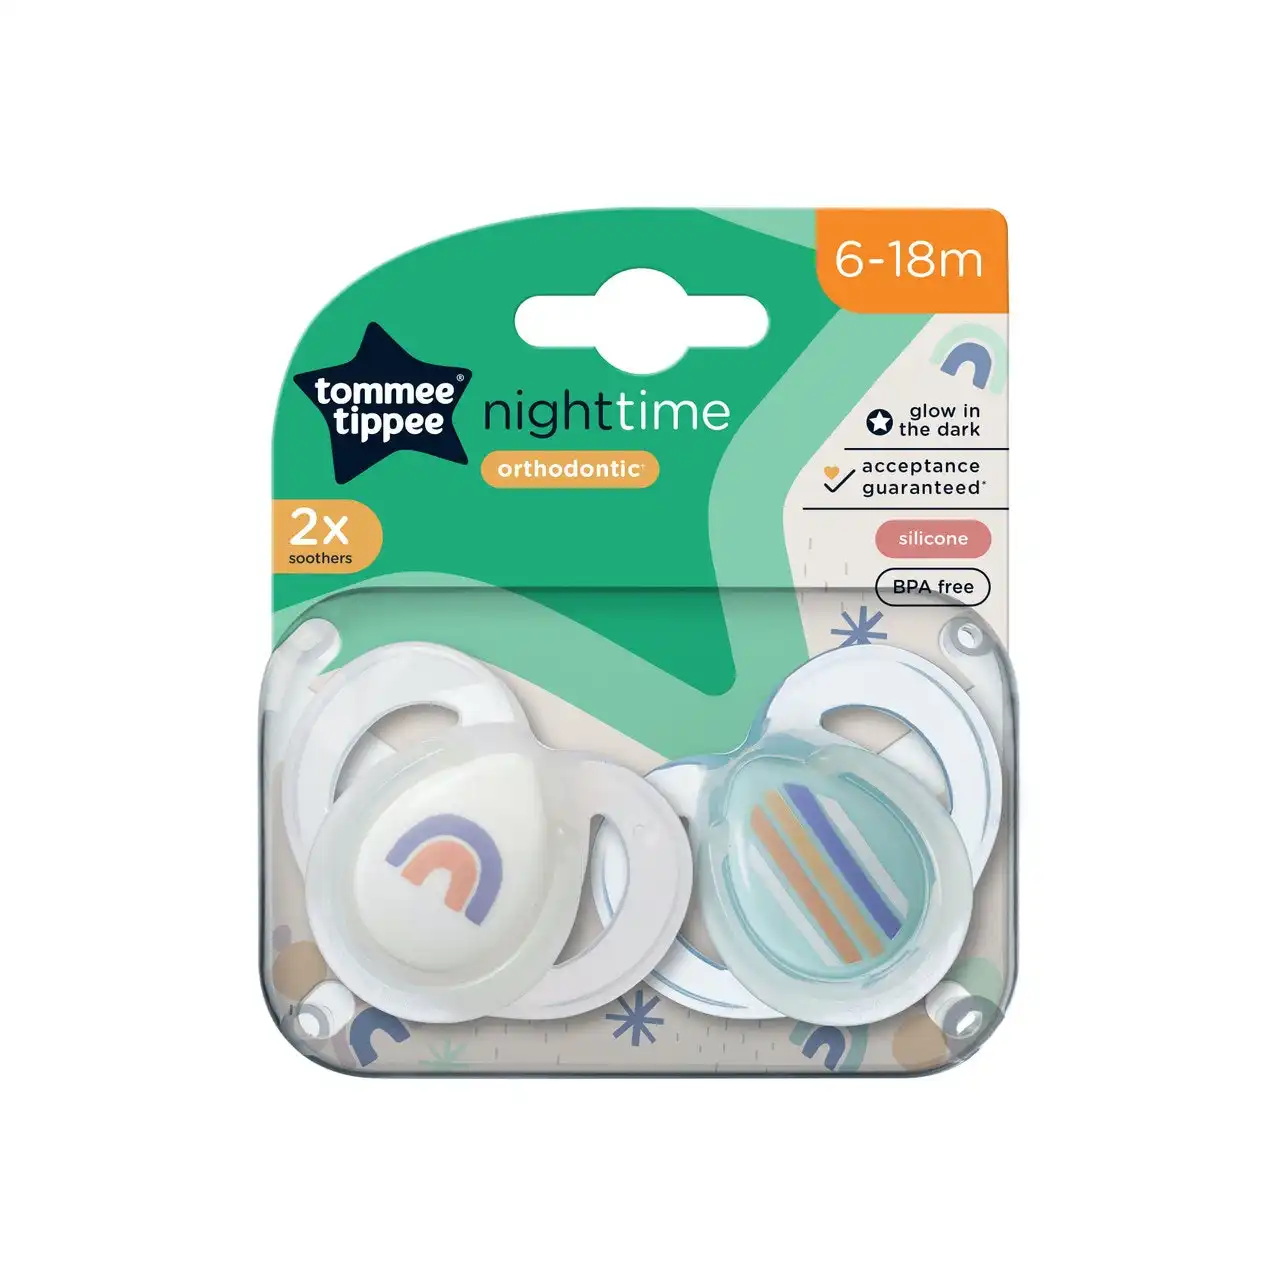 Nighttime soother, 6-18 months, glows in the dark, 2 pack, reusable steriliser pod